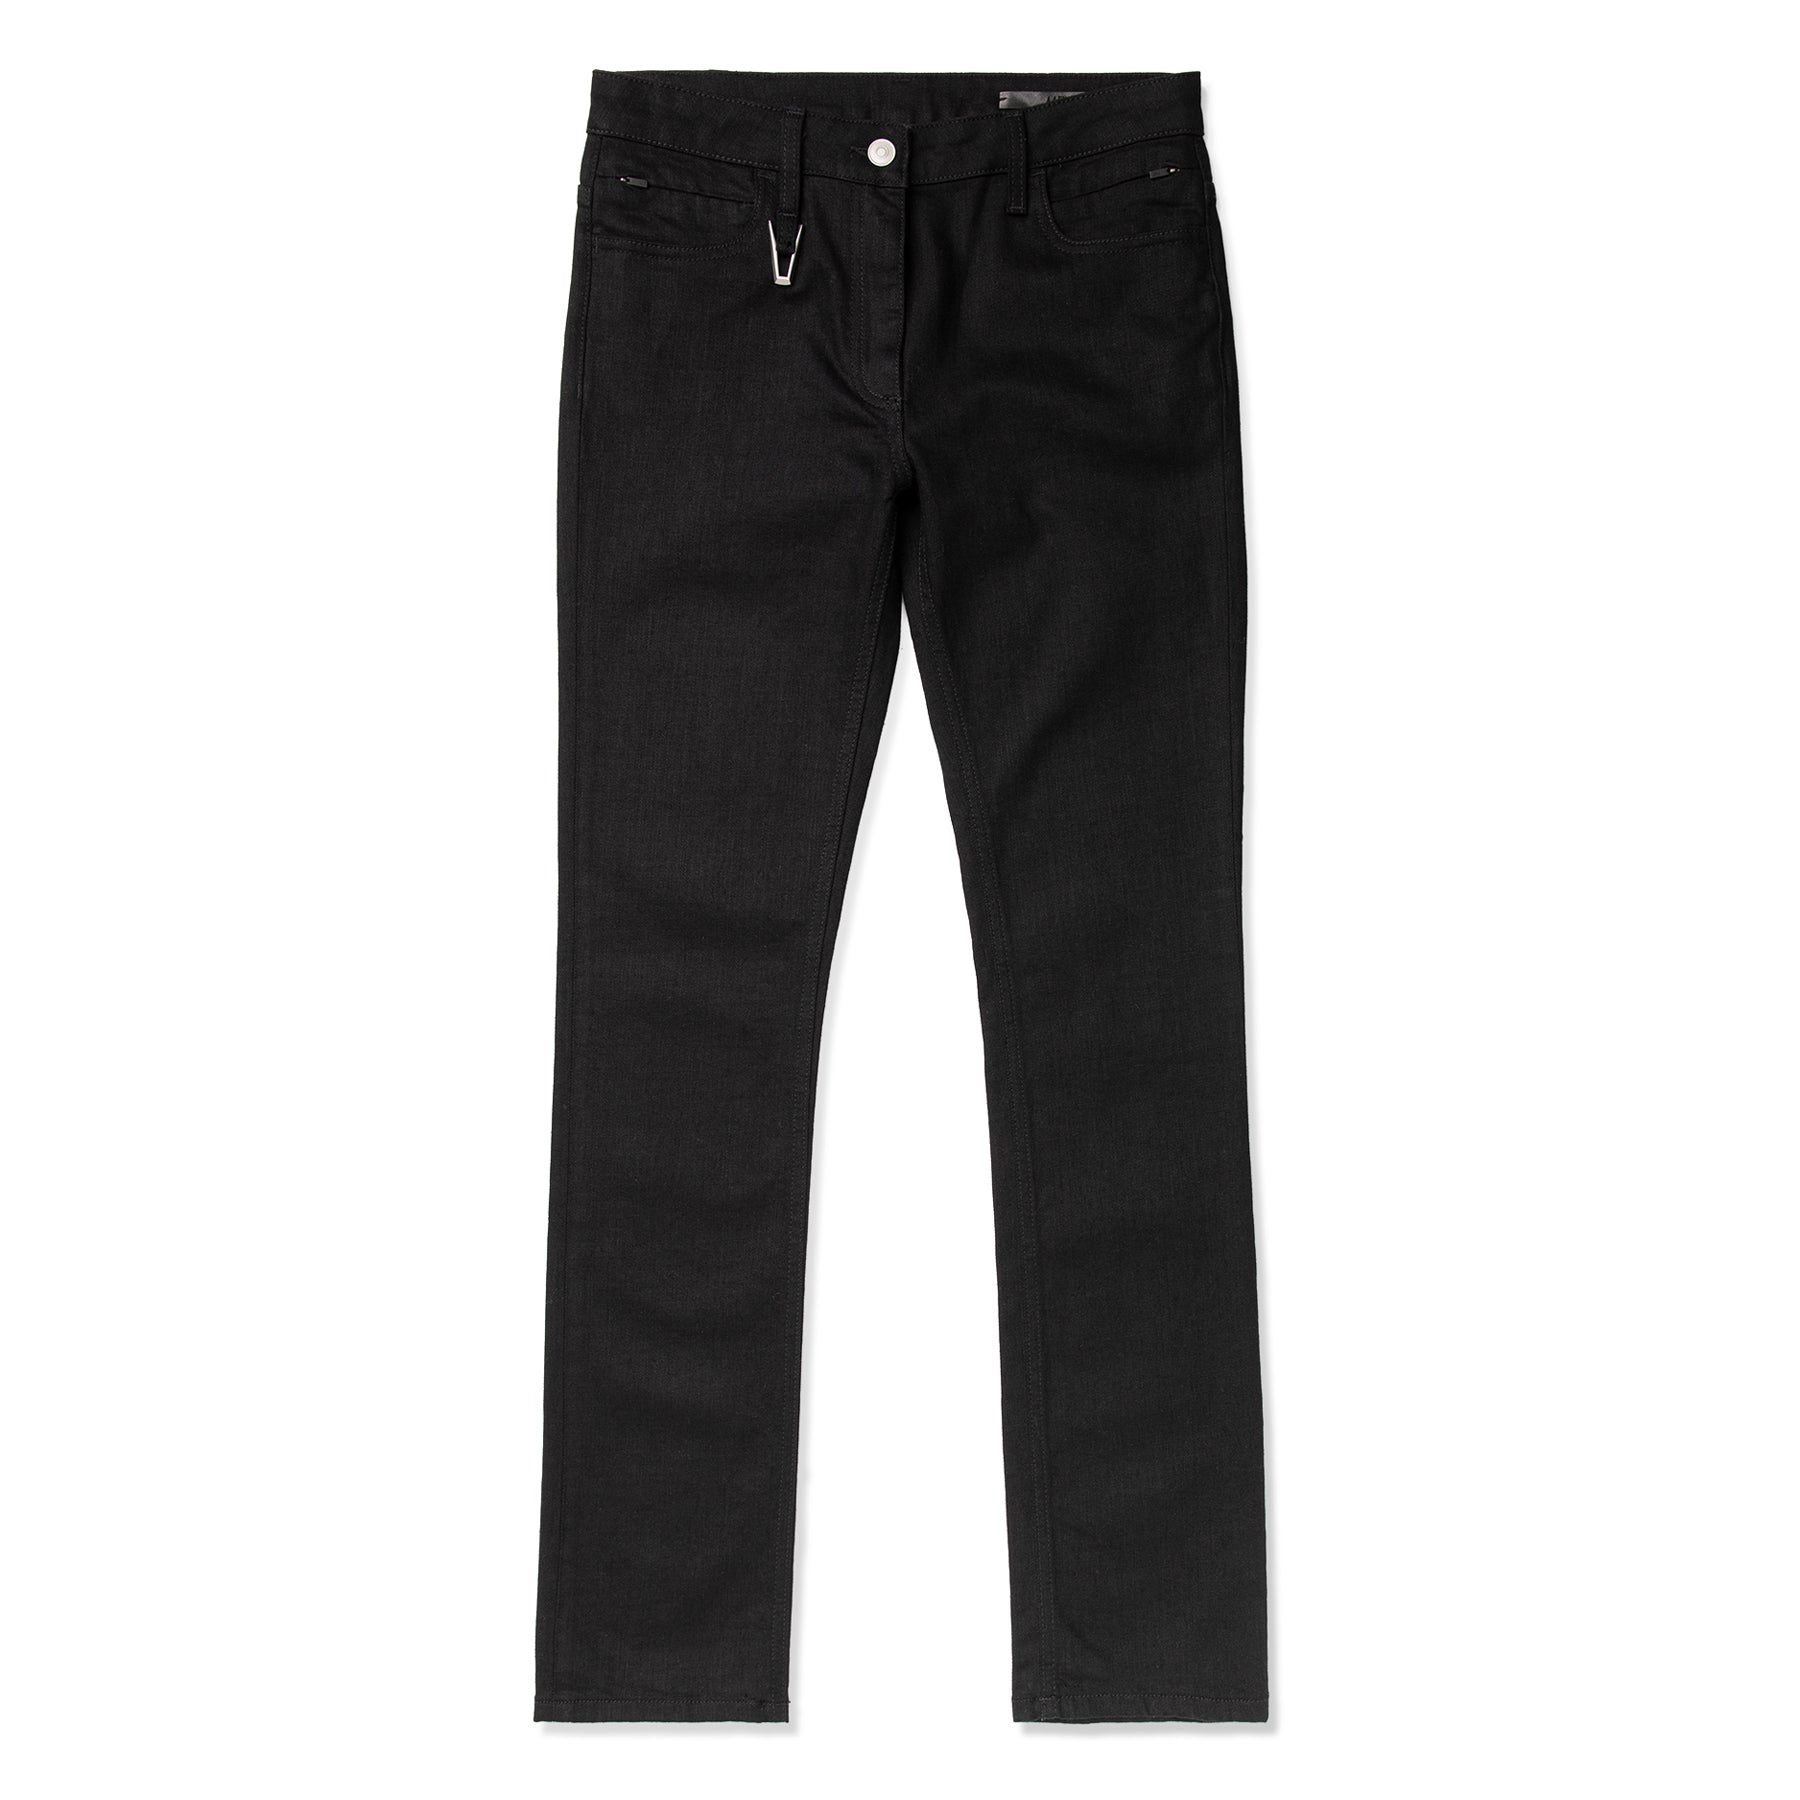 High Quality Mens Cargo Cargo Jeans For Men With 6 Pockets And Elastic Fit  For Work, Combat, And Outdoor Activities From Tiangouu, $20.04 | DHgate.Com